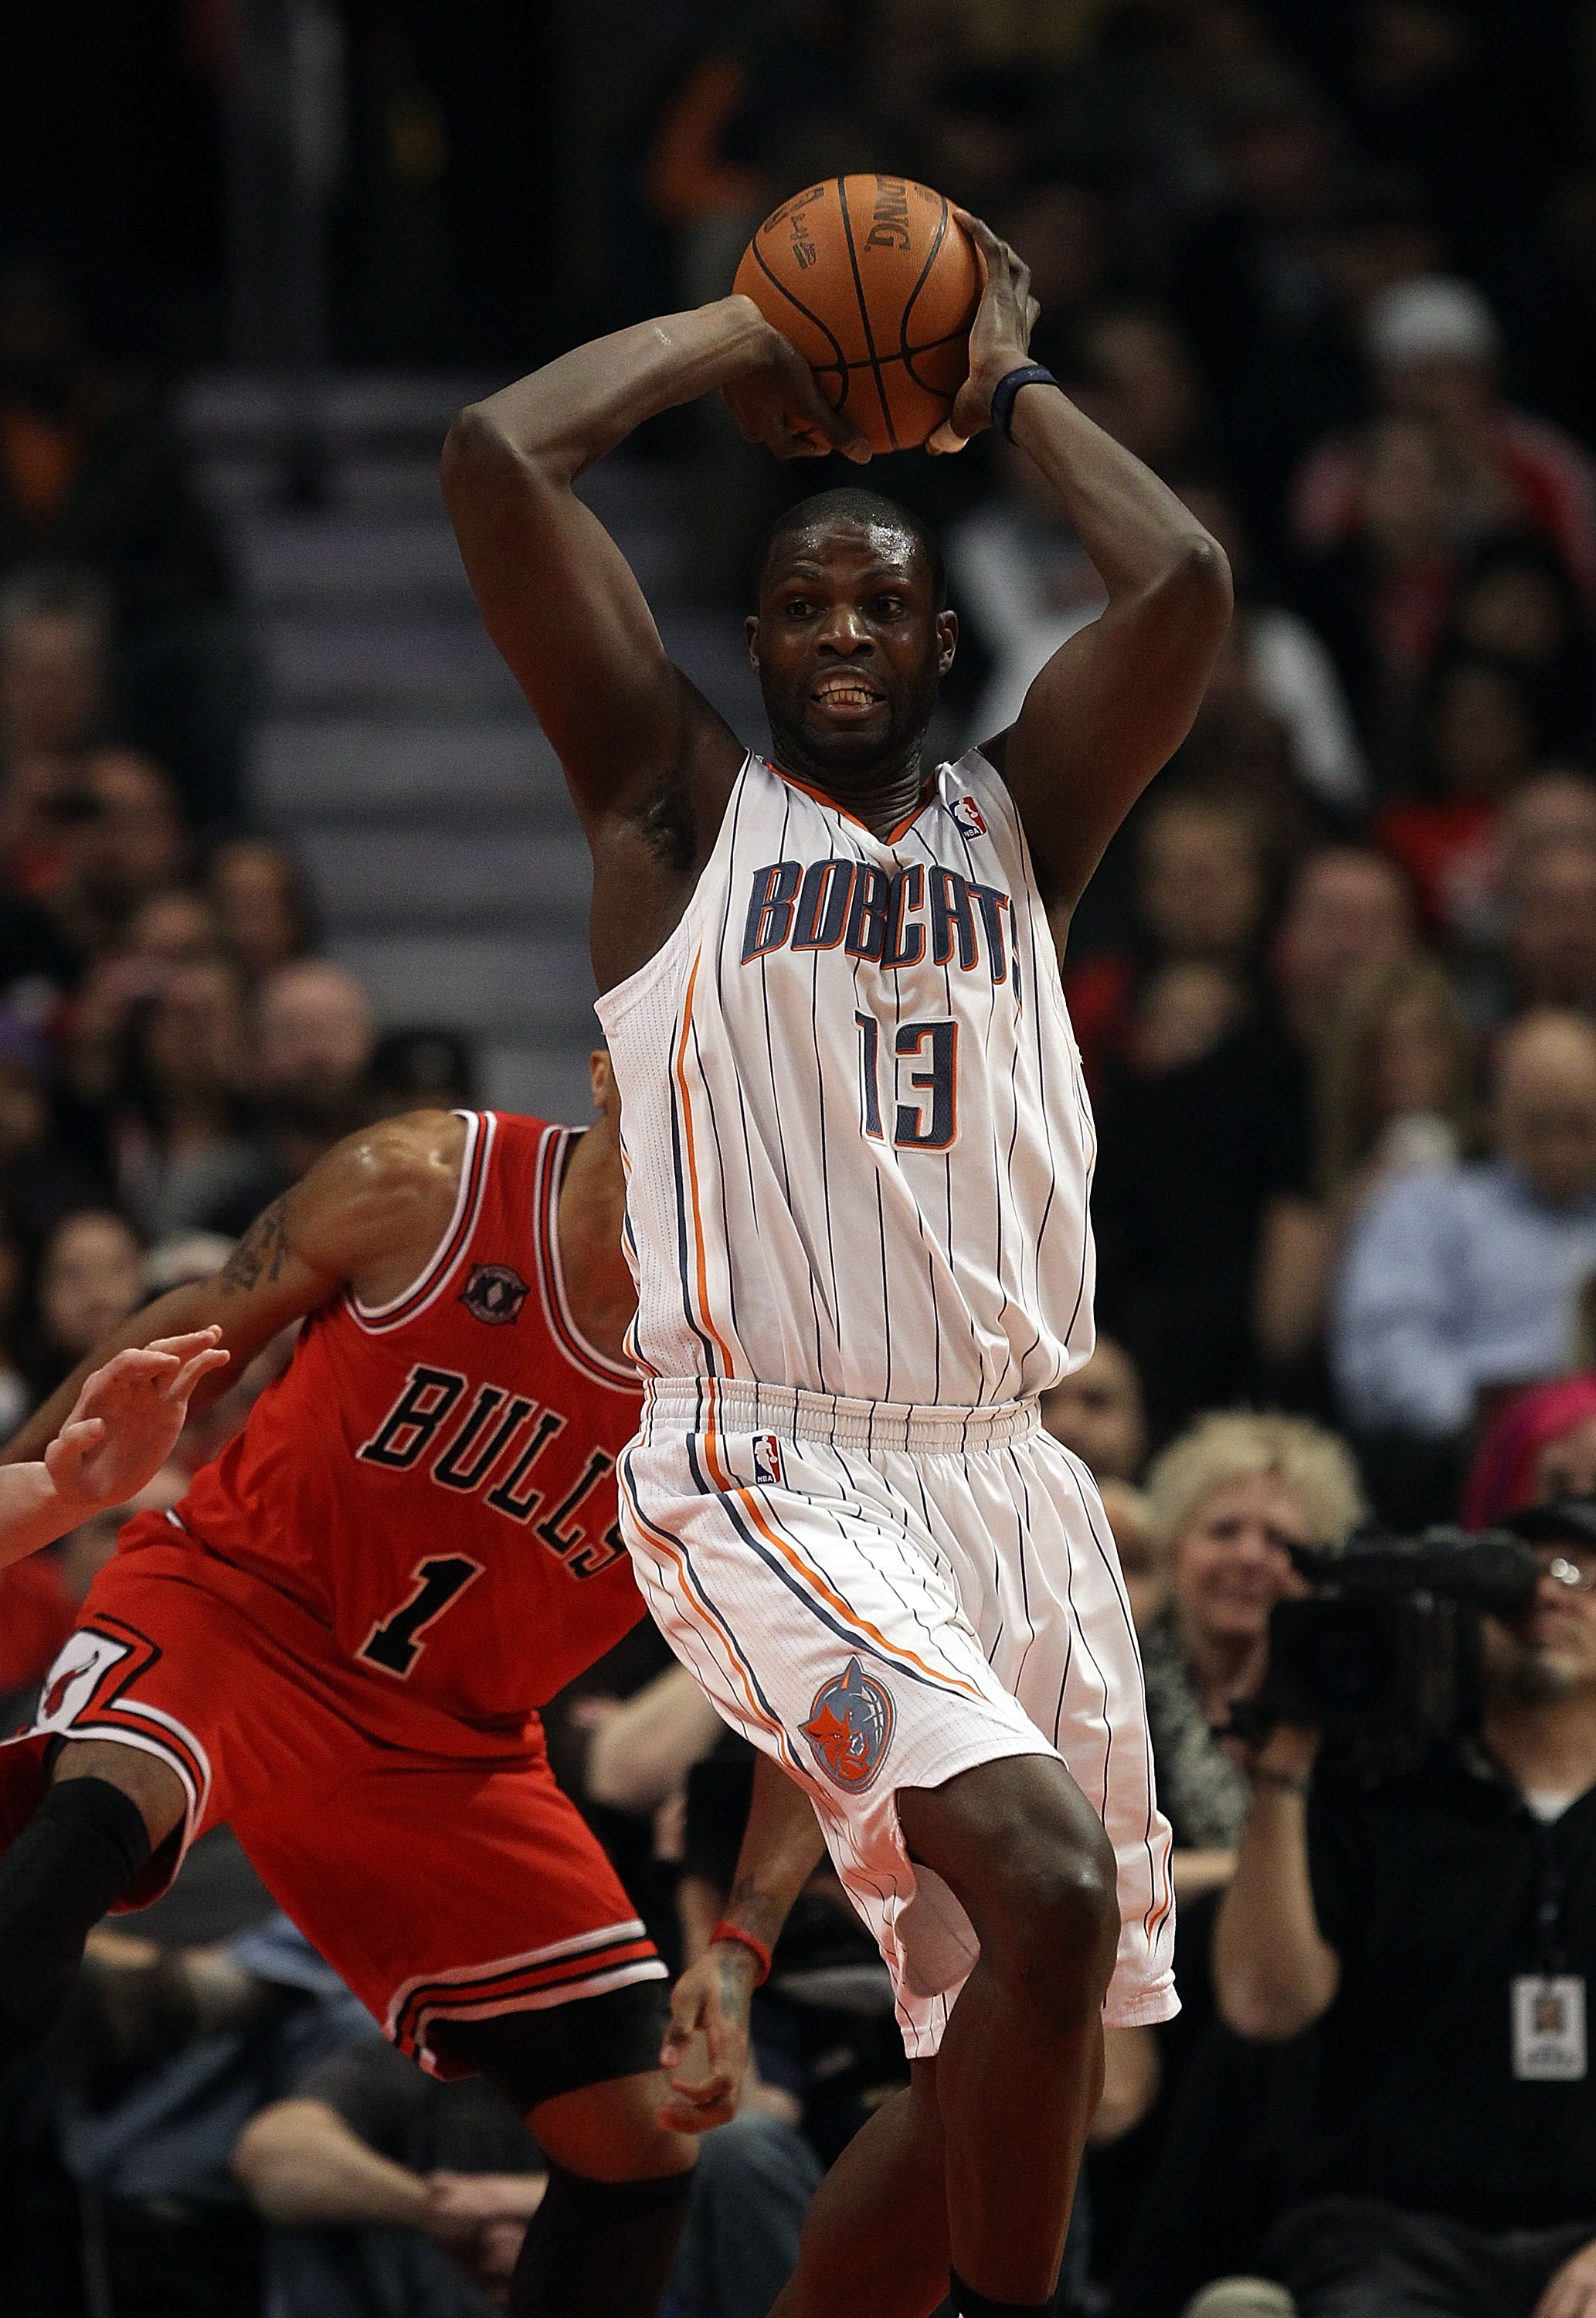 CHICAGO, IL - FEBRUARY 15: Nazr Mohammed #13 of the Charlotte Bobcats controls a rebound in front of Derrick Rose #1 of the Chicago Bulls at the United Center on February 15, 2011 in Chicago, Illinois. The Bulls defeated the Bobcats 106-94. NOTE TO USER: 